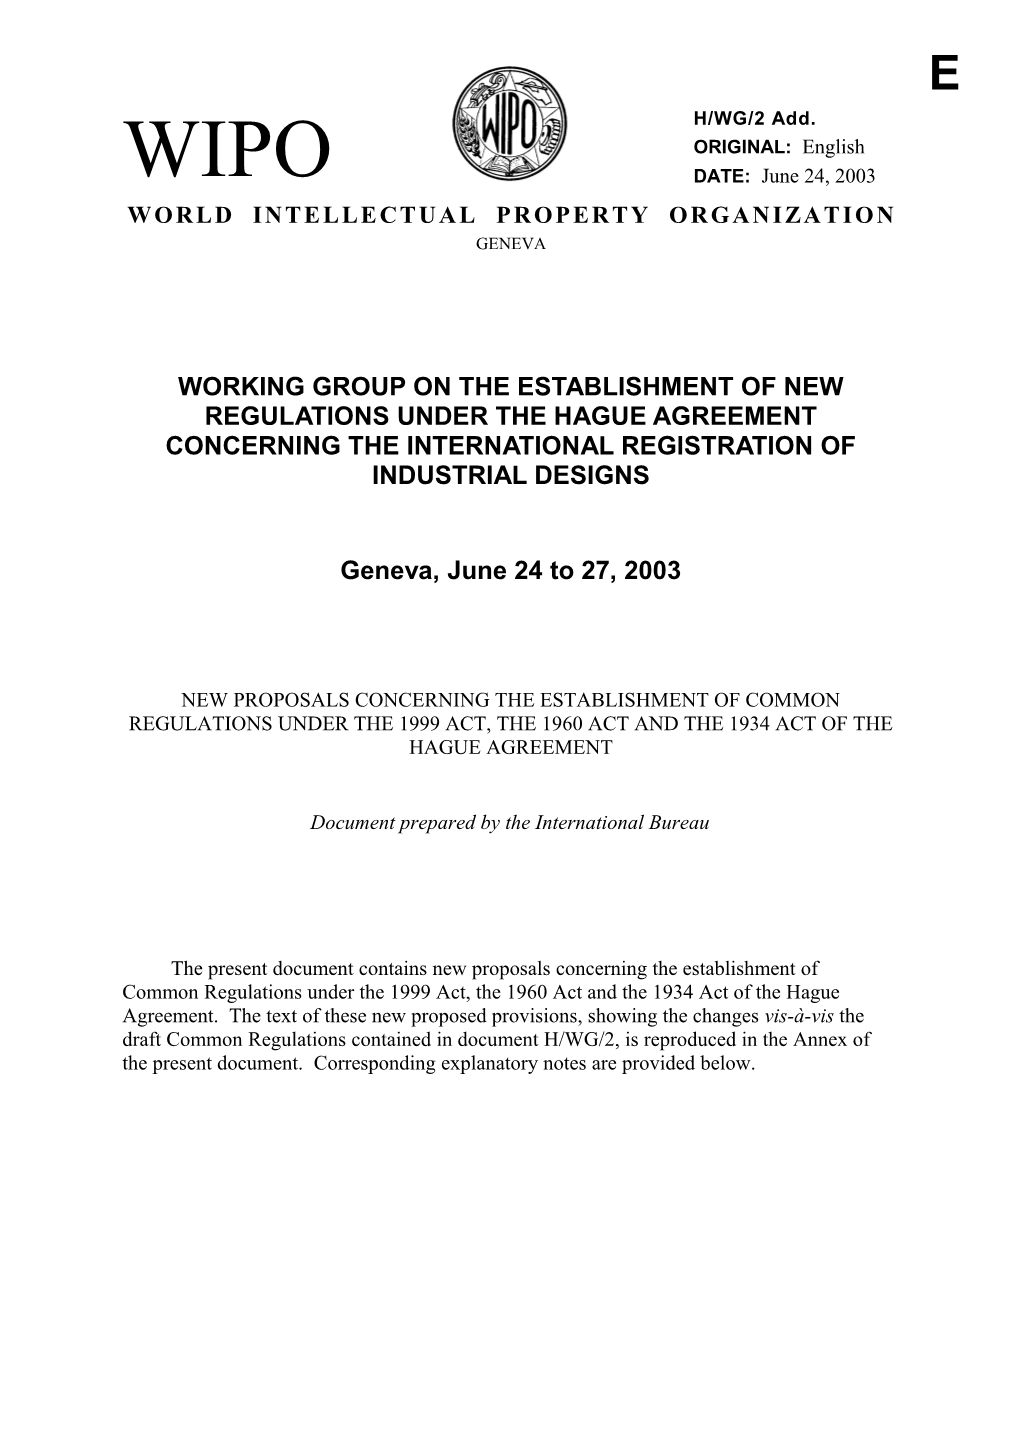 H/WG/2 ADD.: New Proposals Concerning the Establishment of Common Regulations Under The